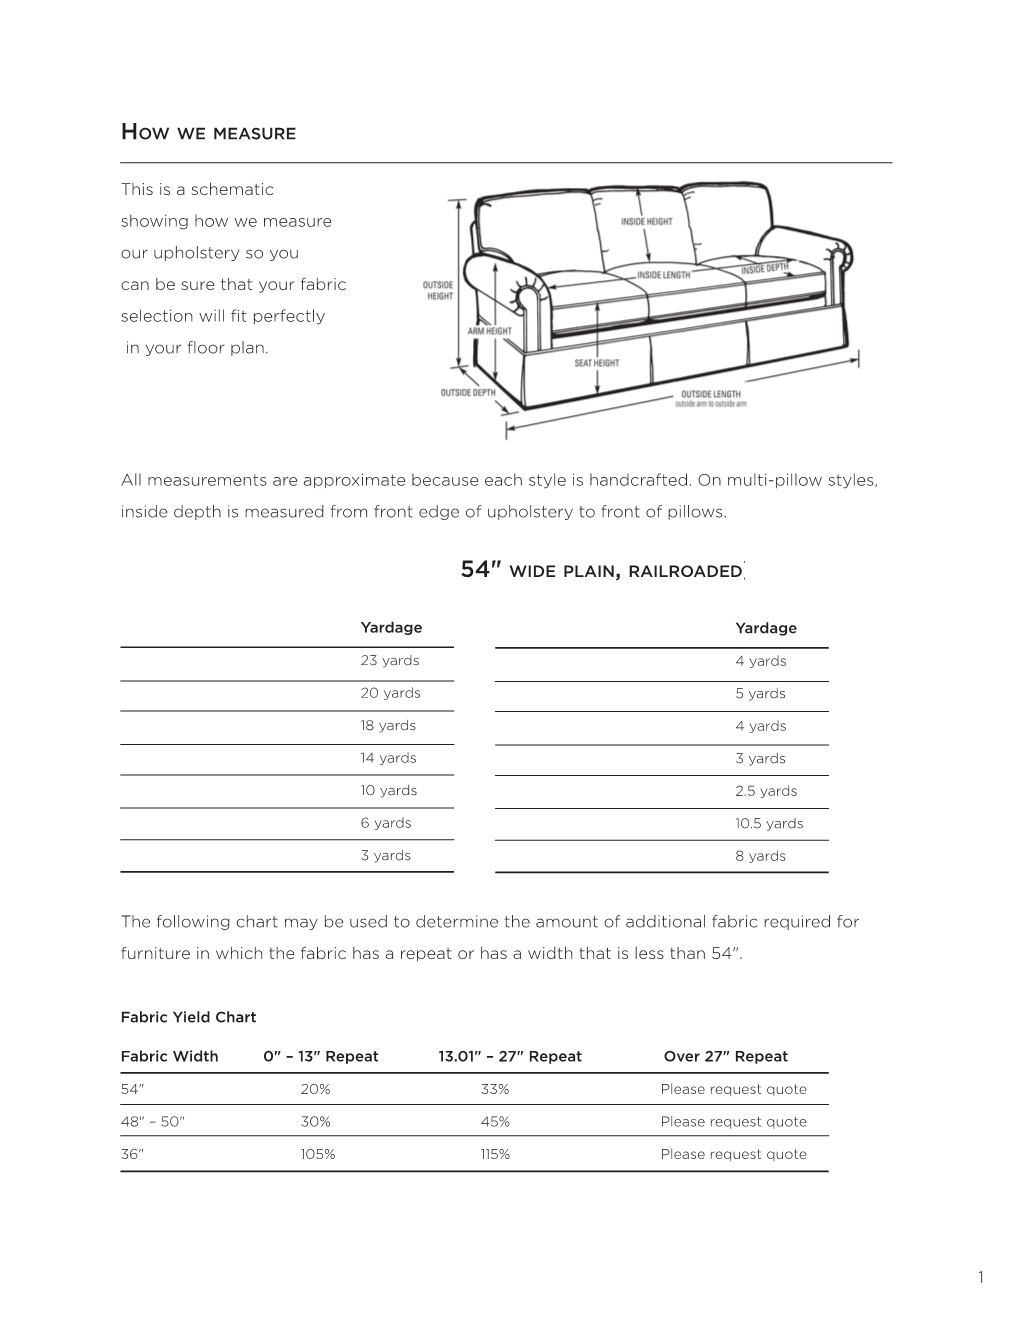 1 This Is a Schematic Showing How We Measure Our Upholstery So You Can